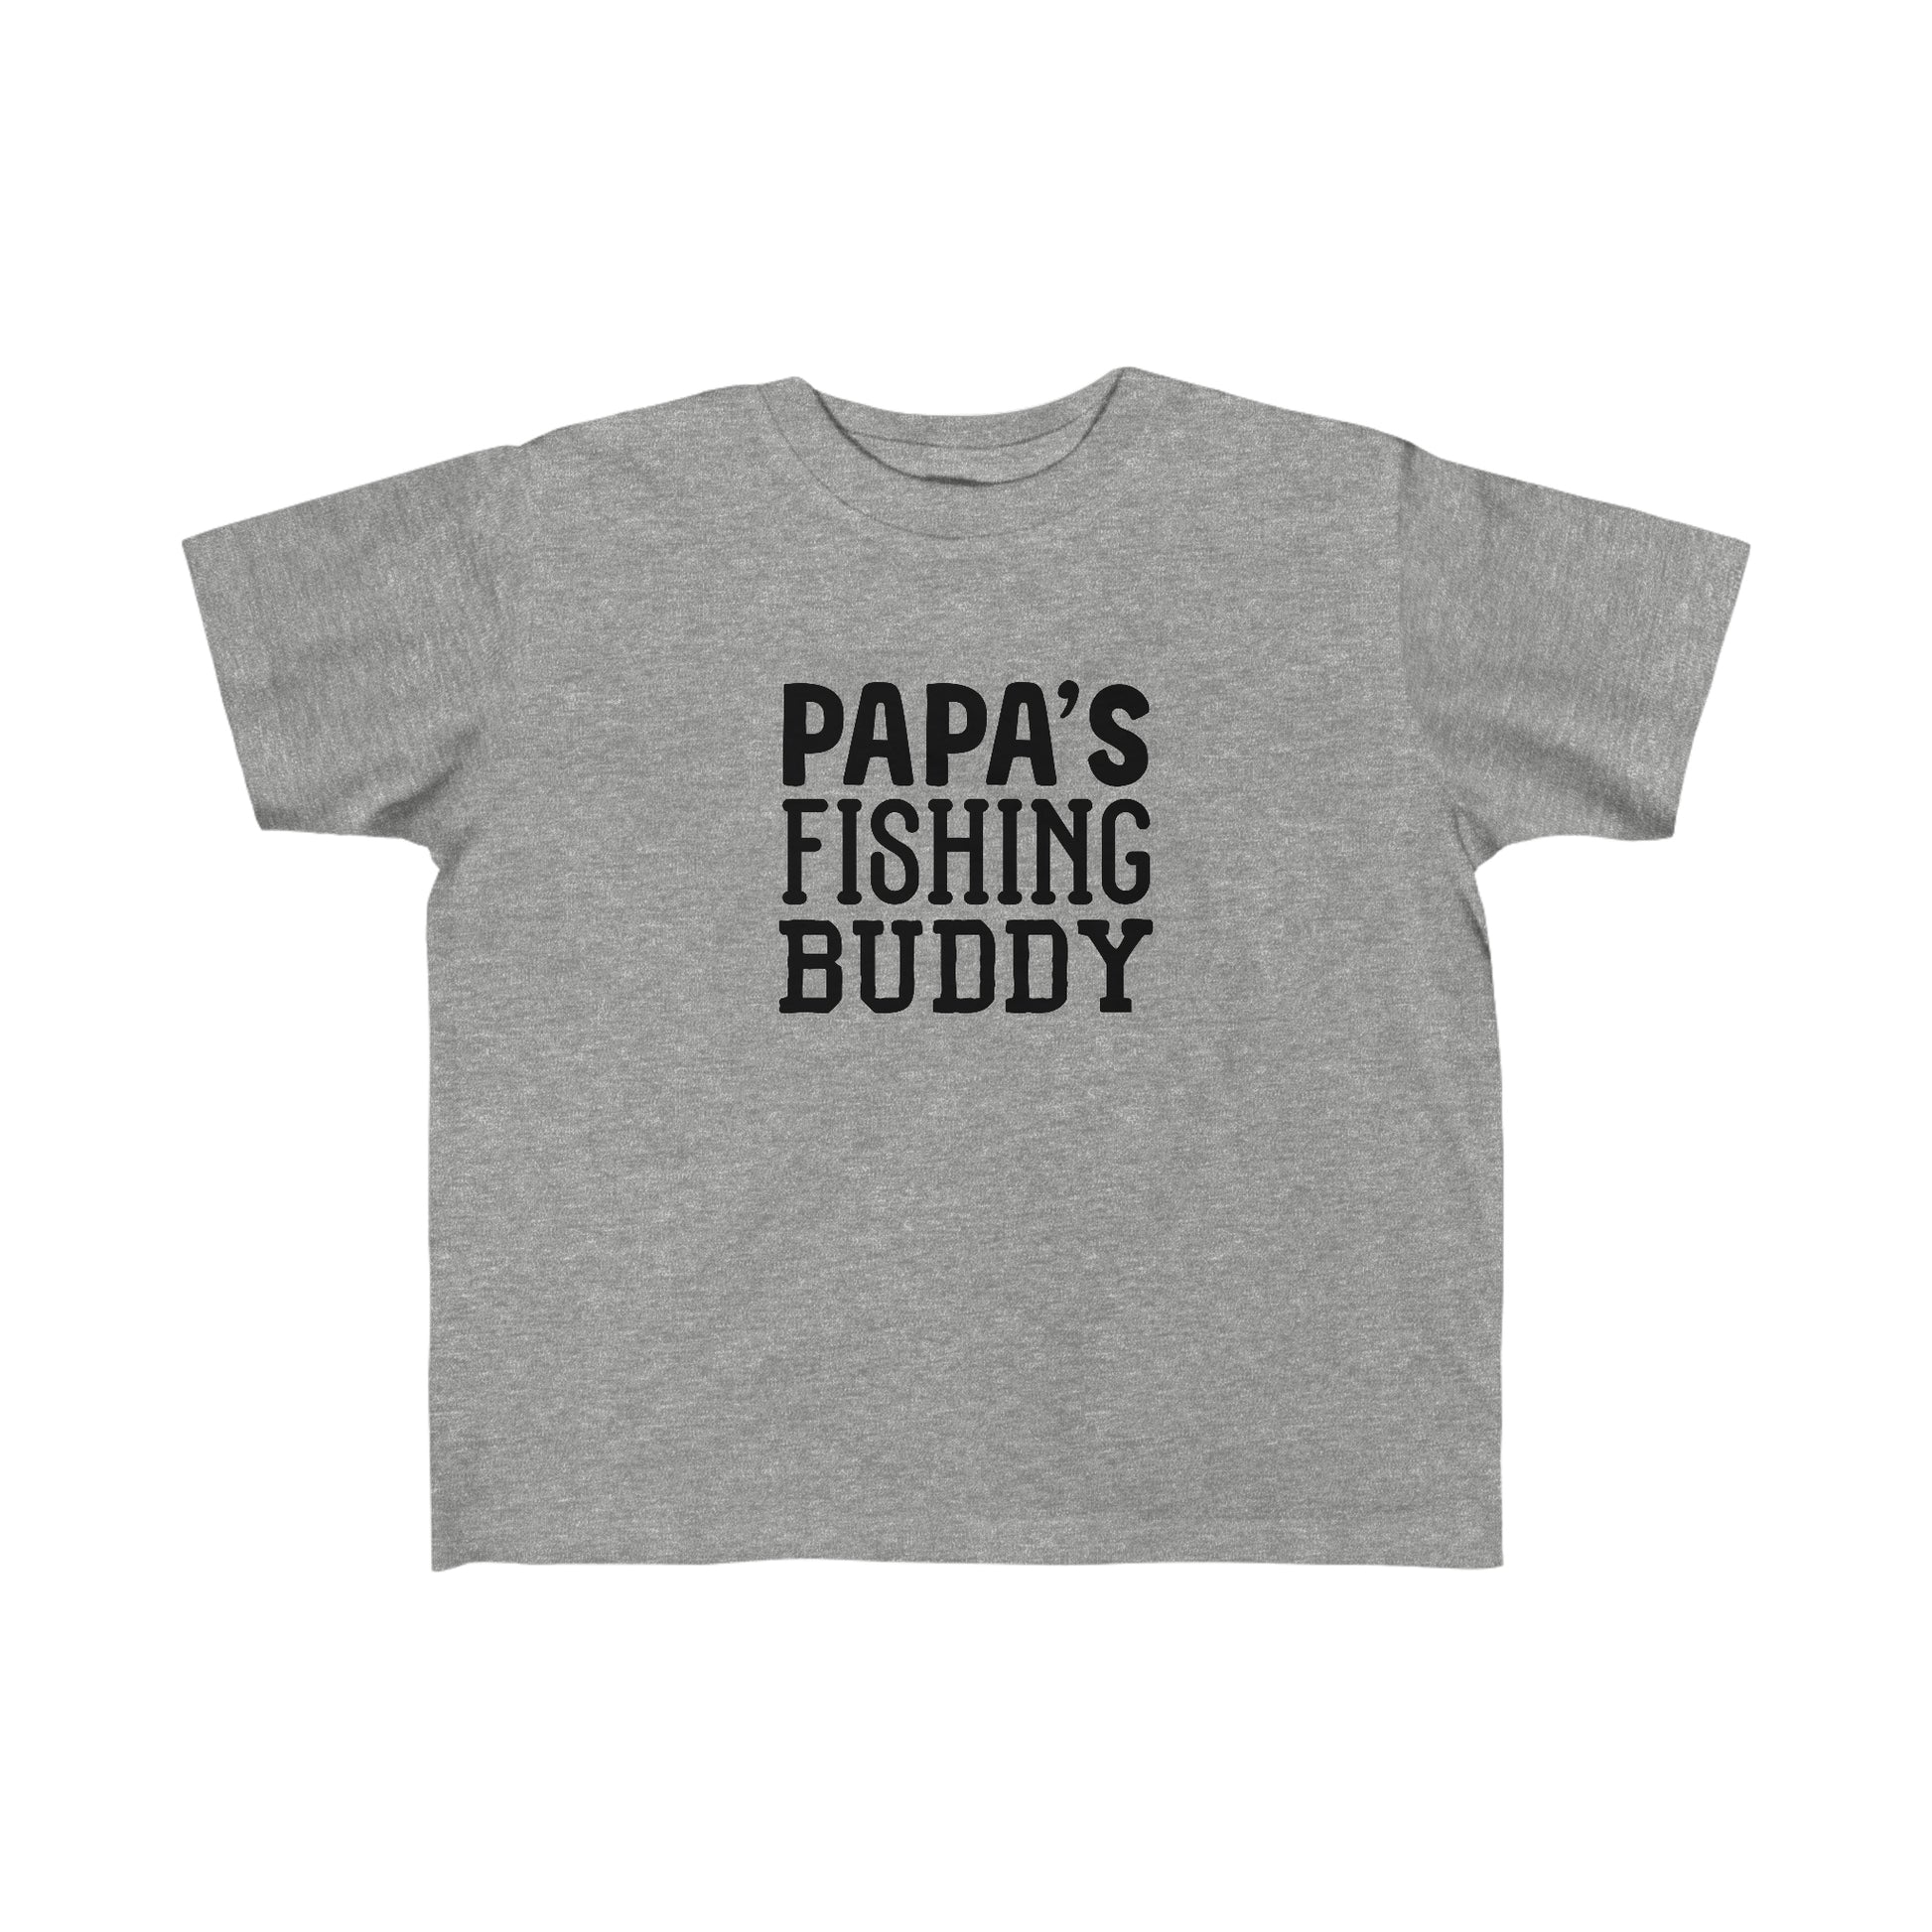 "Papa's Fishing Buddy" Toddler Shirt - Weave Got Gifts - Unique Gifts You Won’t Find Anywhere Else!